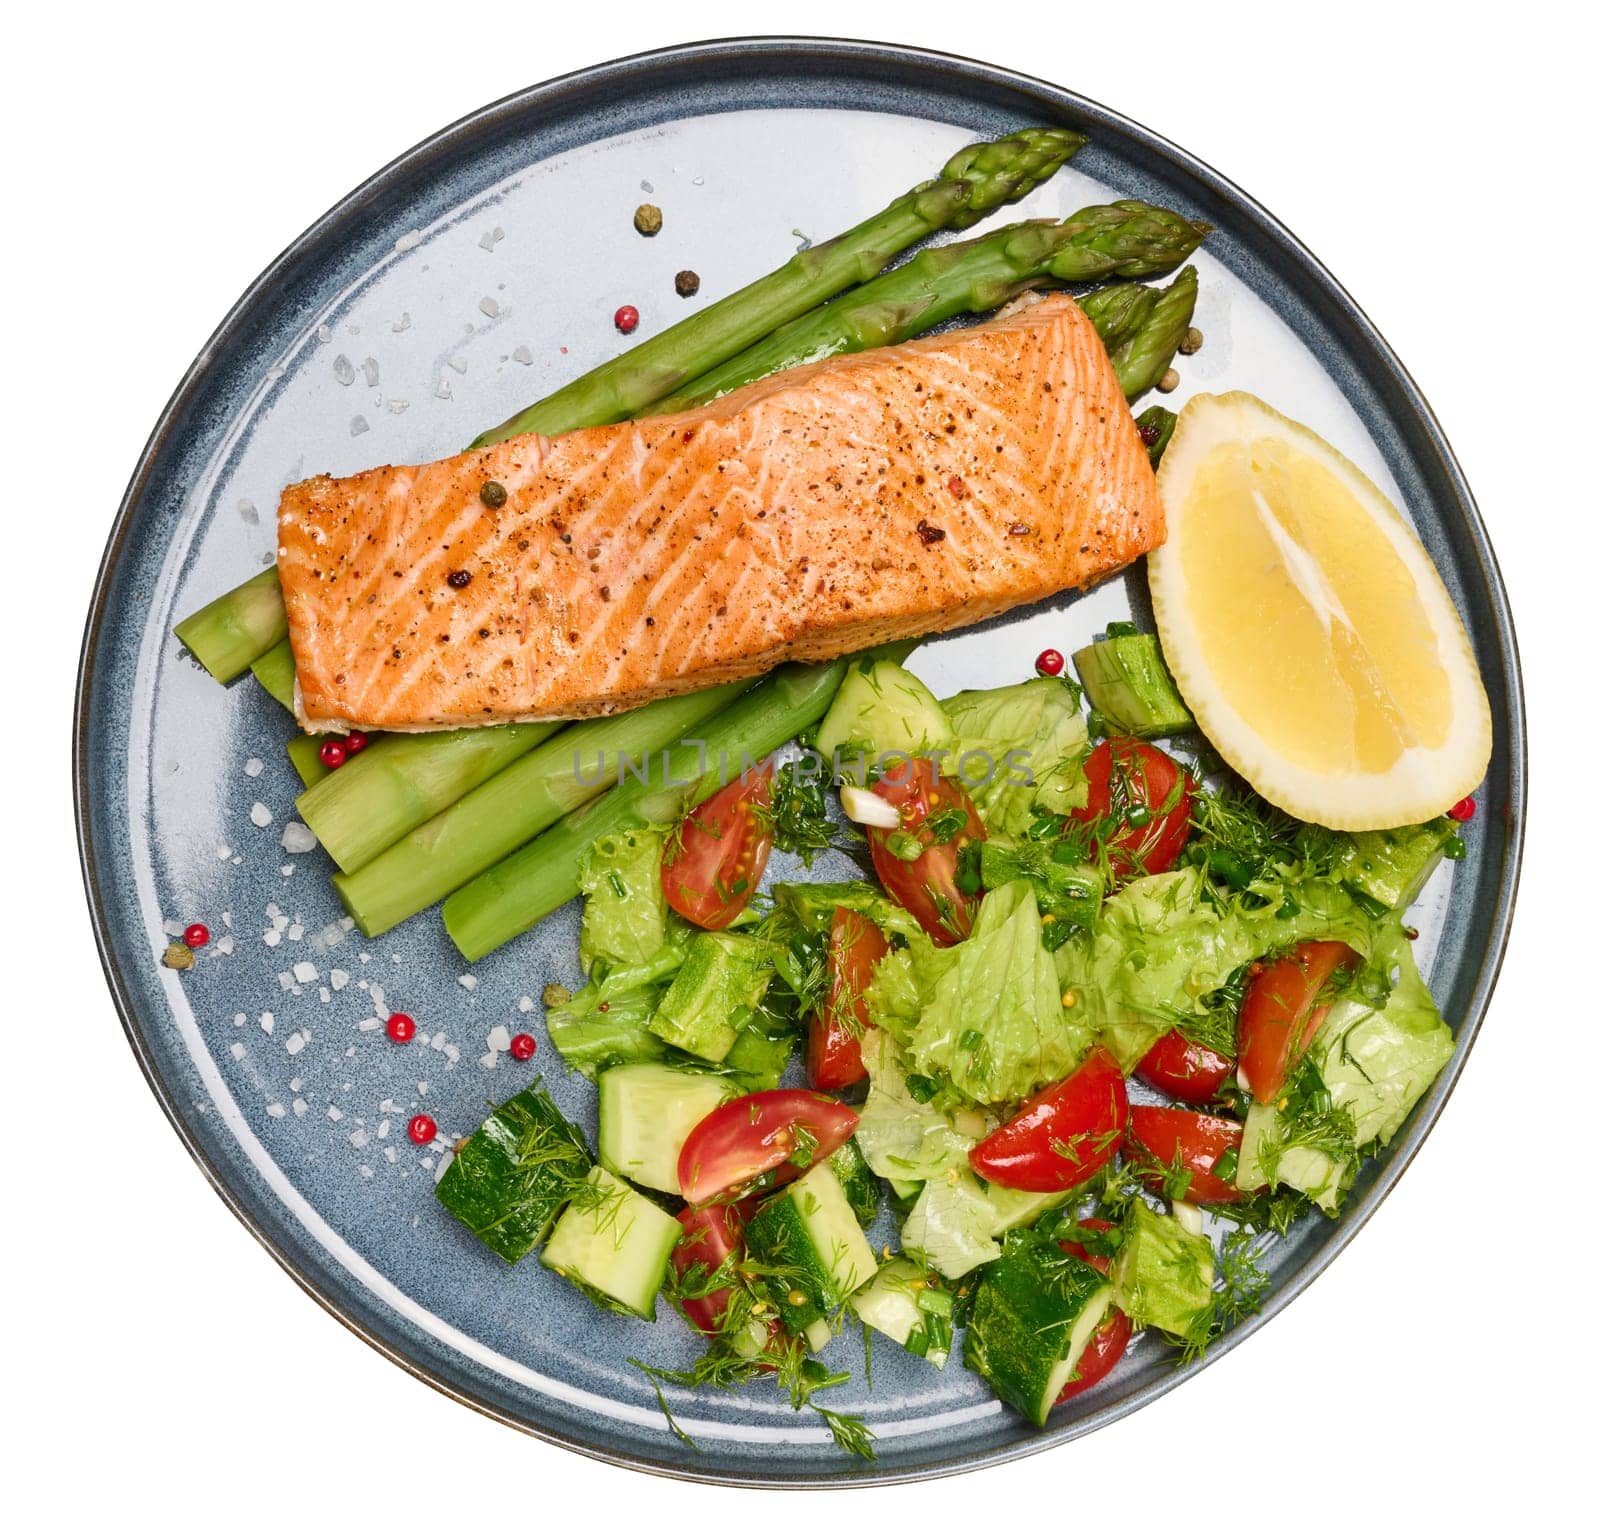 Healthy lunch with grilled trout with asparagus and fresh tomato and cucumber salad, a row of lemon slice. Food on a blue round plate, isolated background